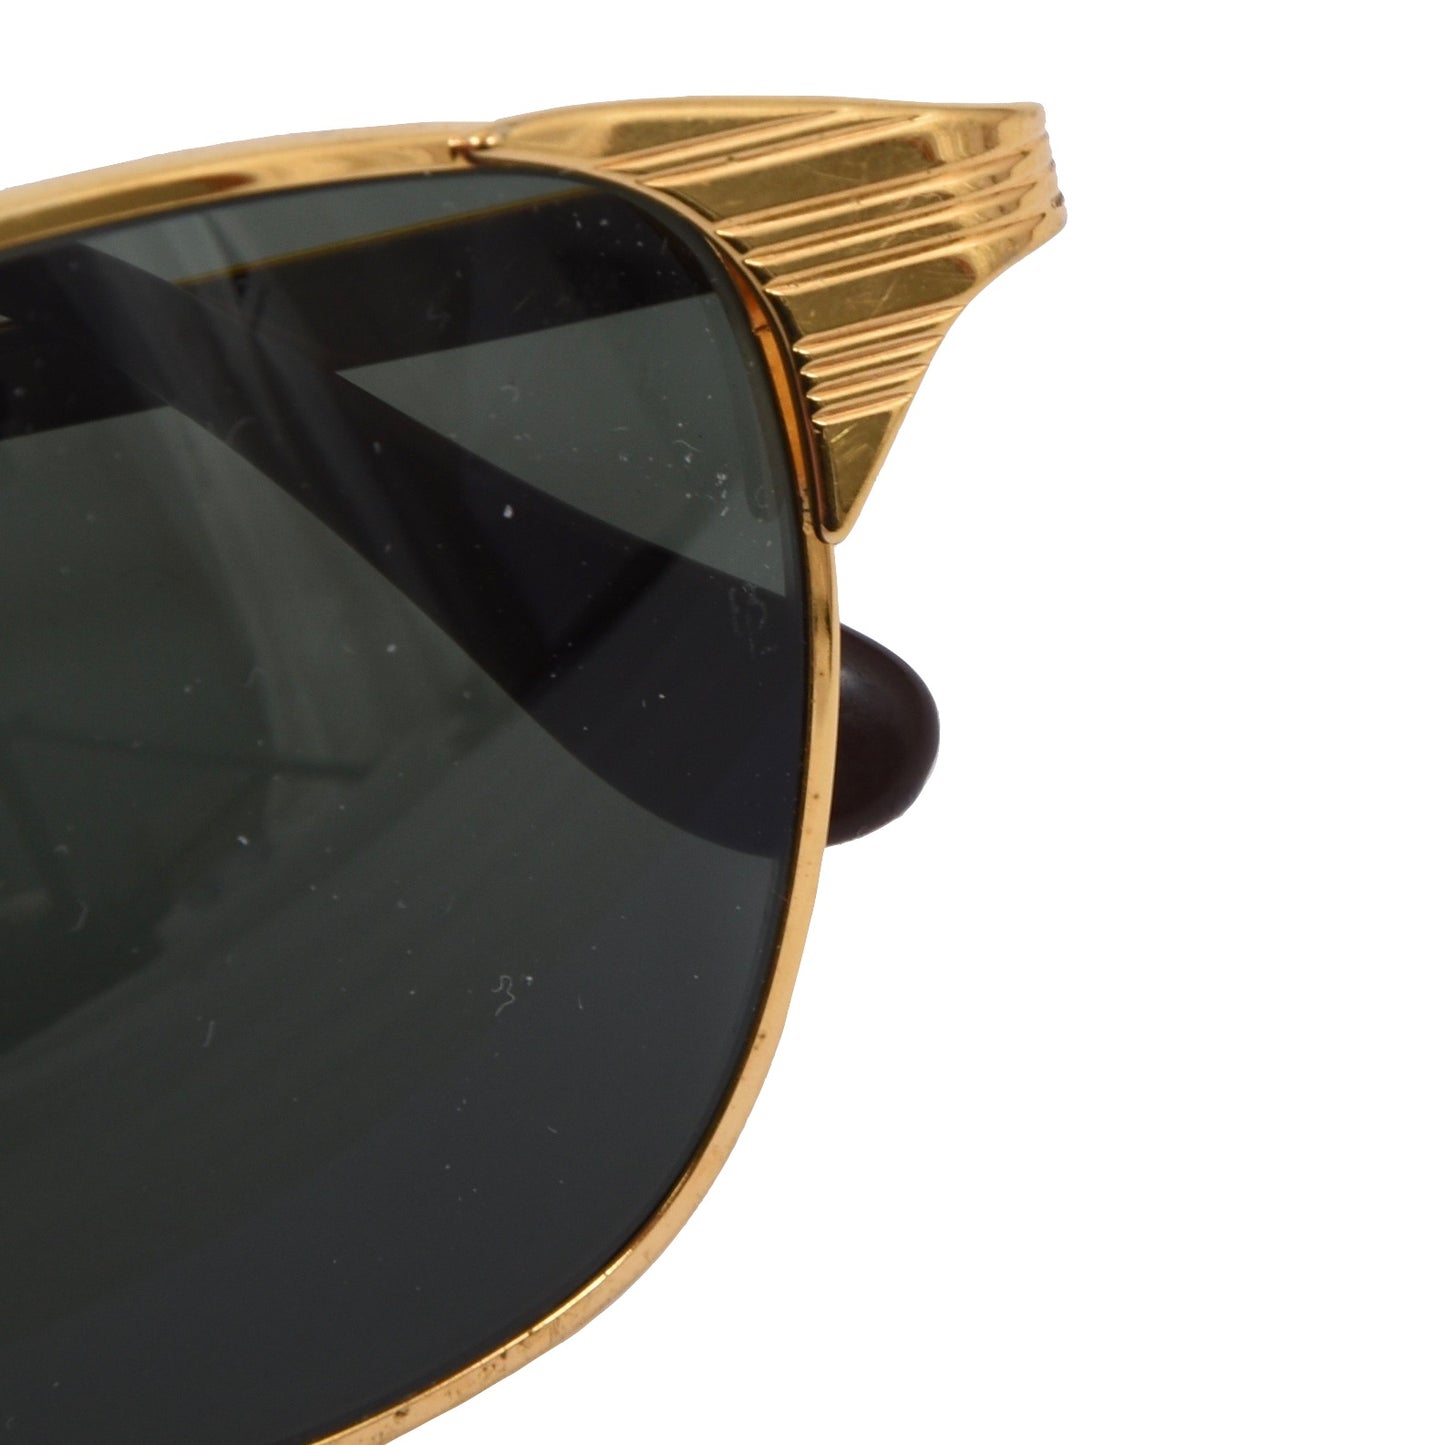 Bausch & Lomb Ray-Ban Signet Sunglasses - Gold